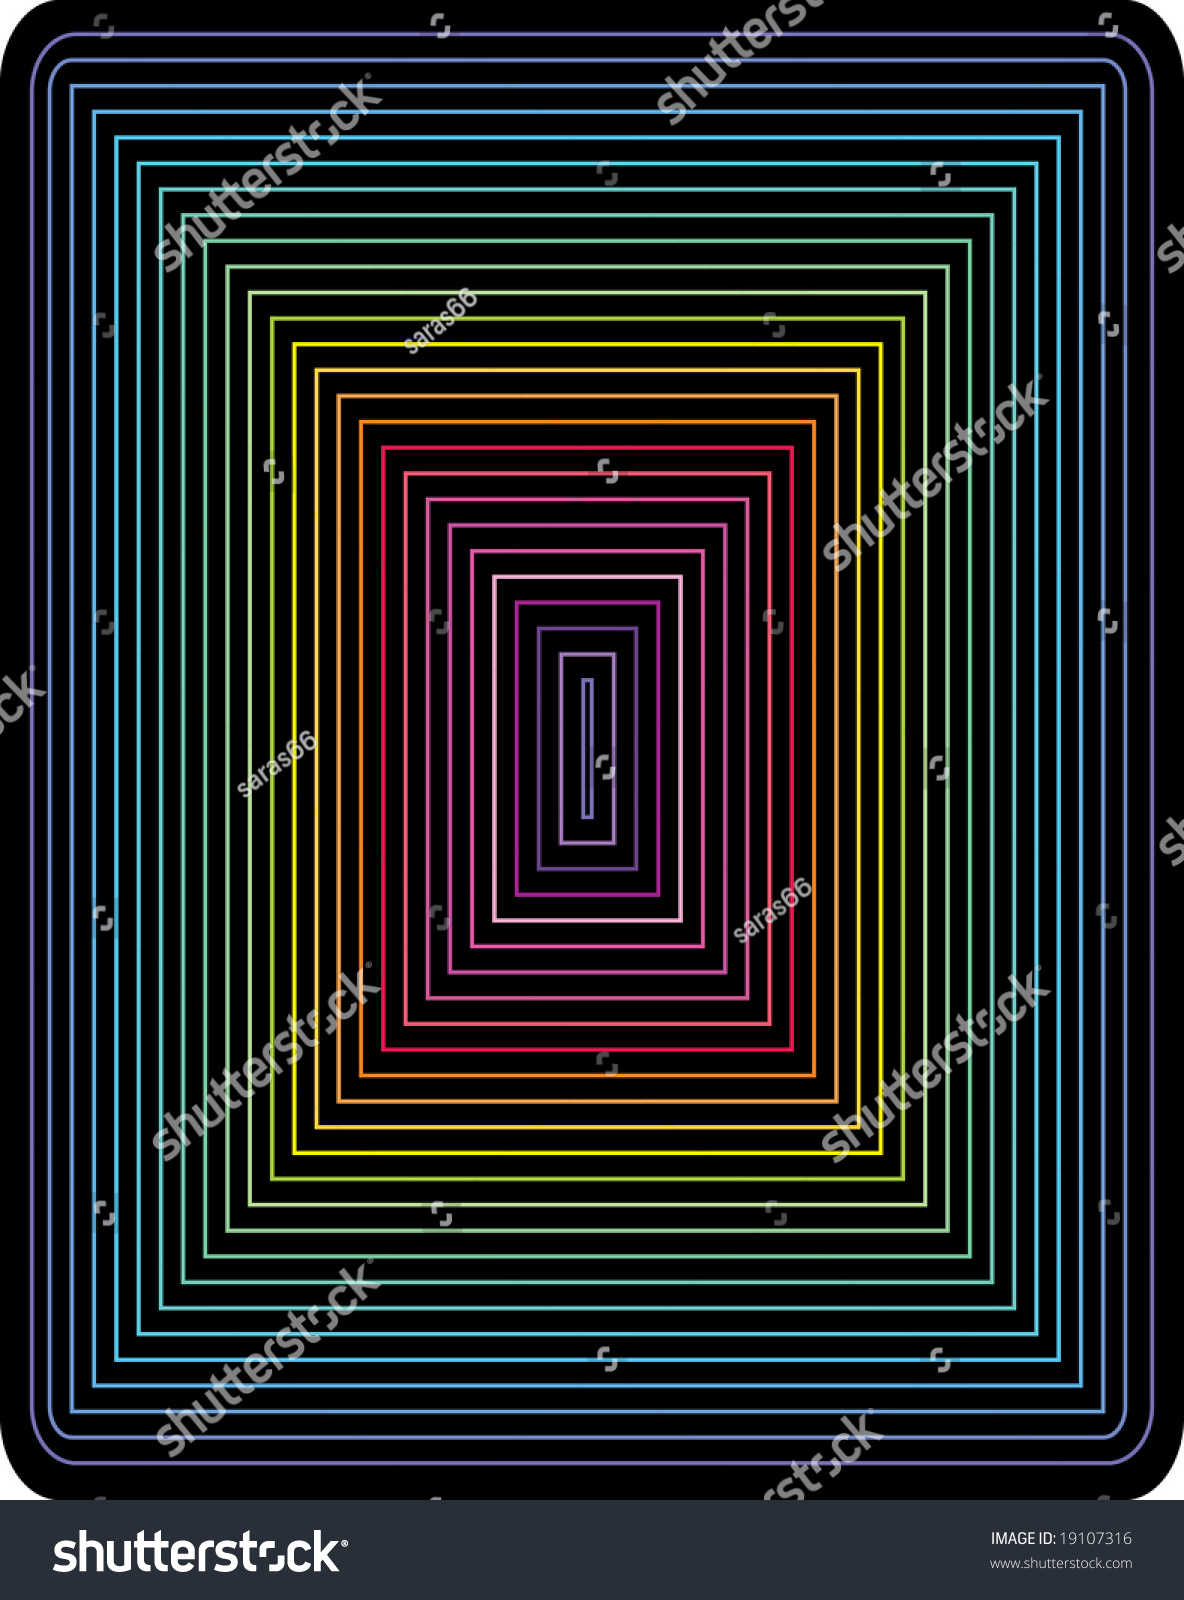 Black Square Colaur Strip Vector Stock Vector (Royalty Free) 19107316 ...